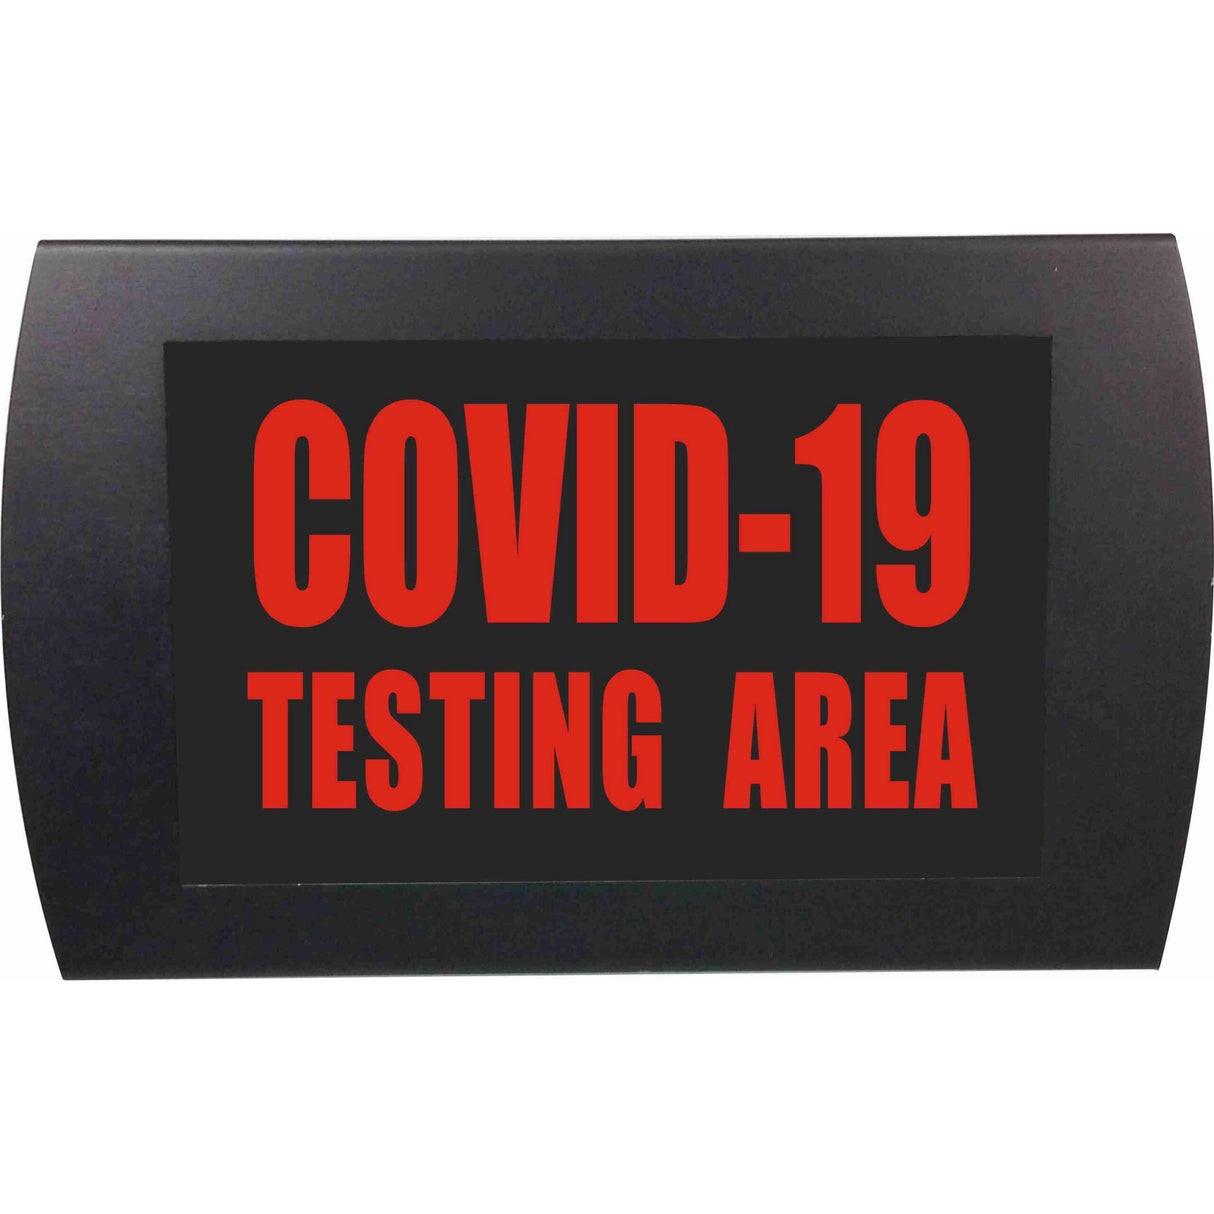 American Recorder Technologies OAS-2049M-RD "COVID-19 TESTING AREA" Wall Mount LED Lighted Sign, Red